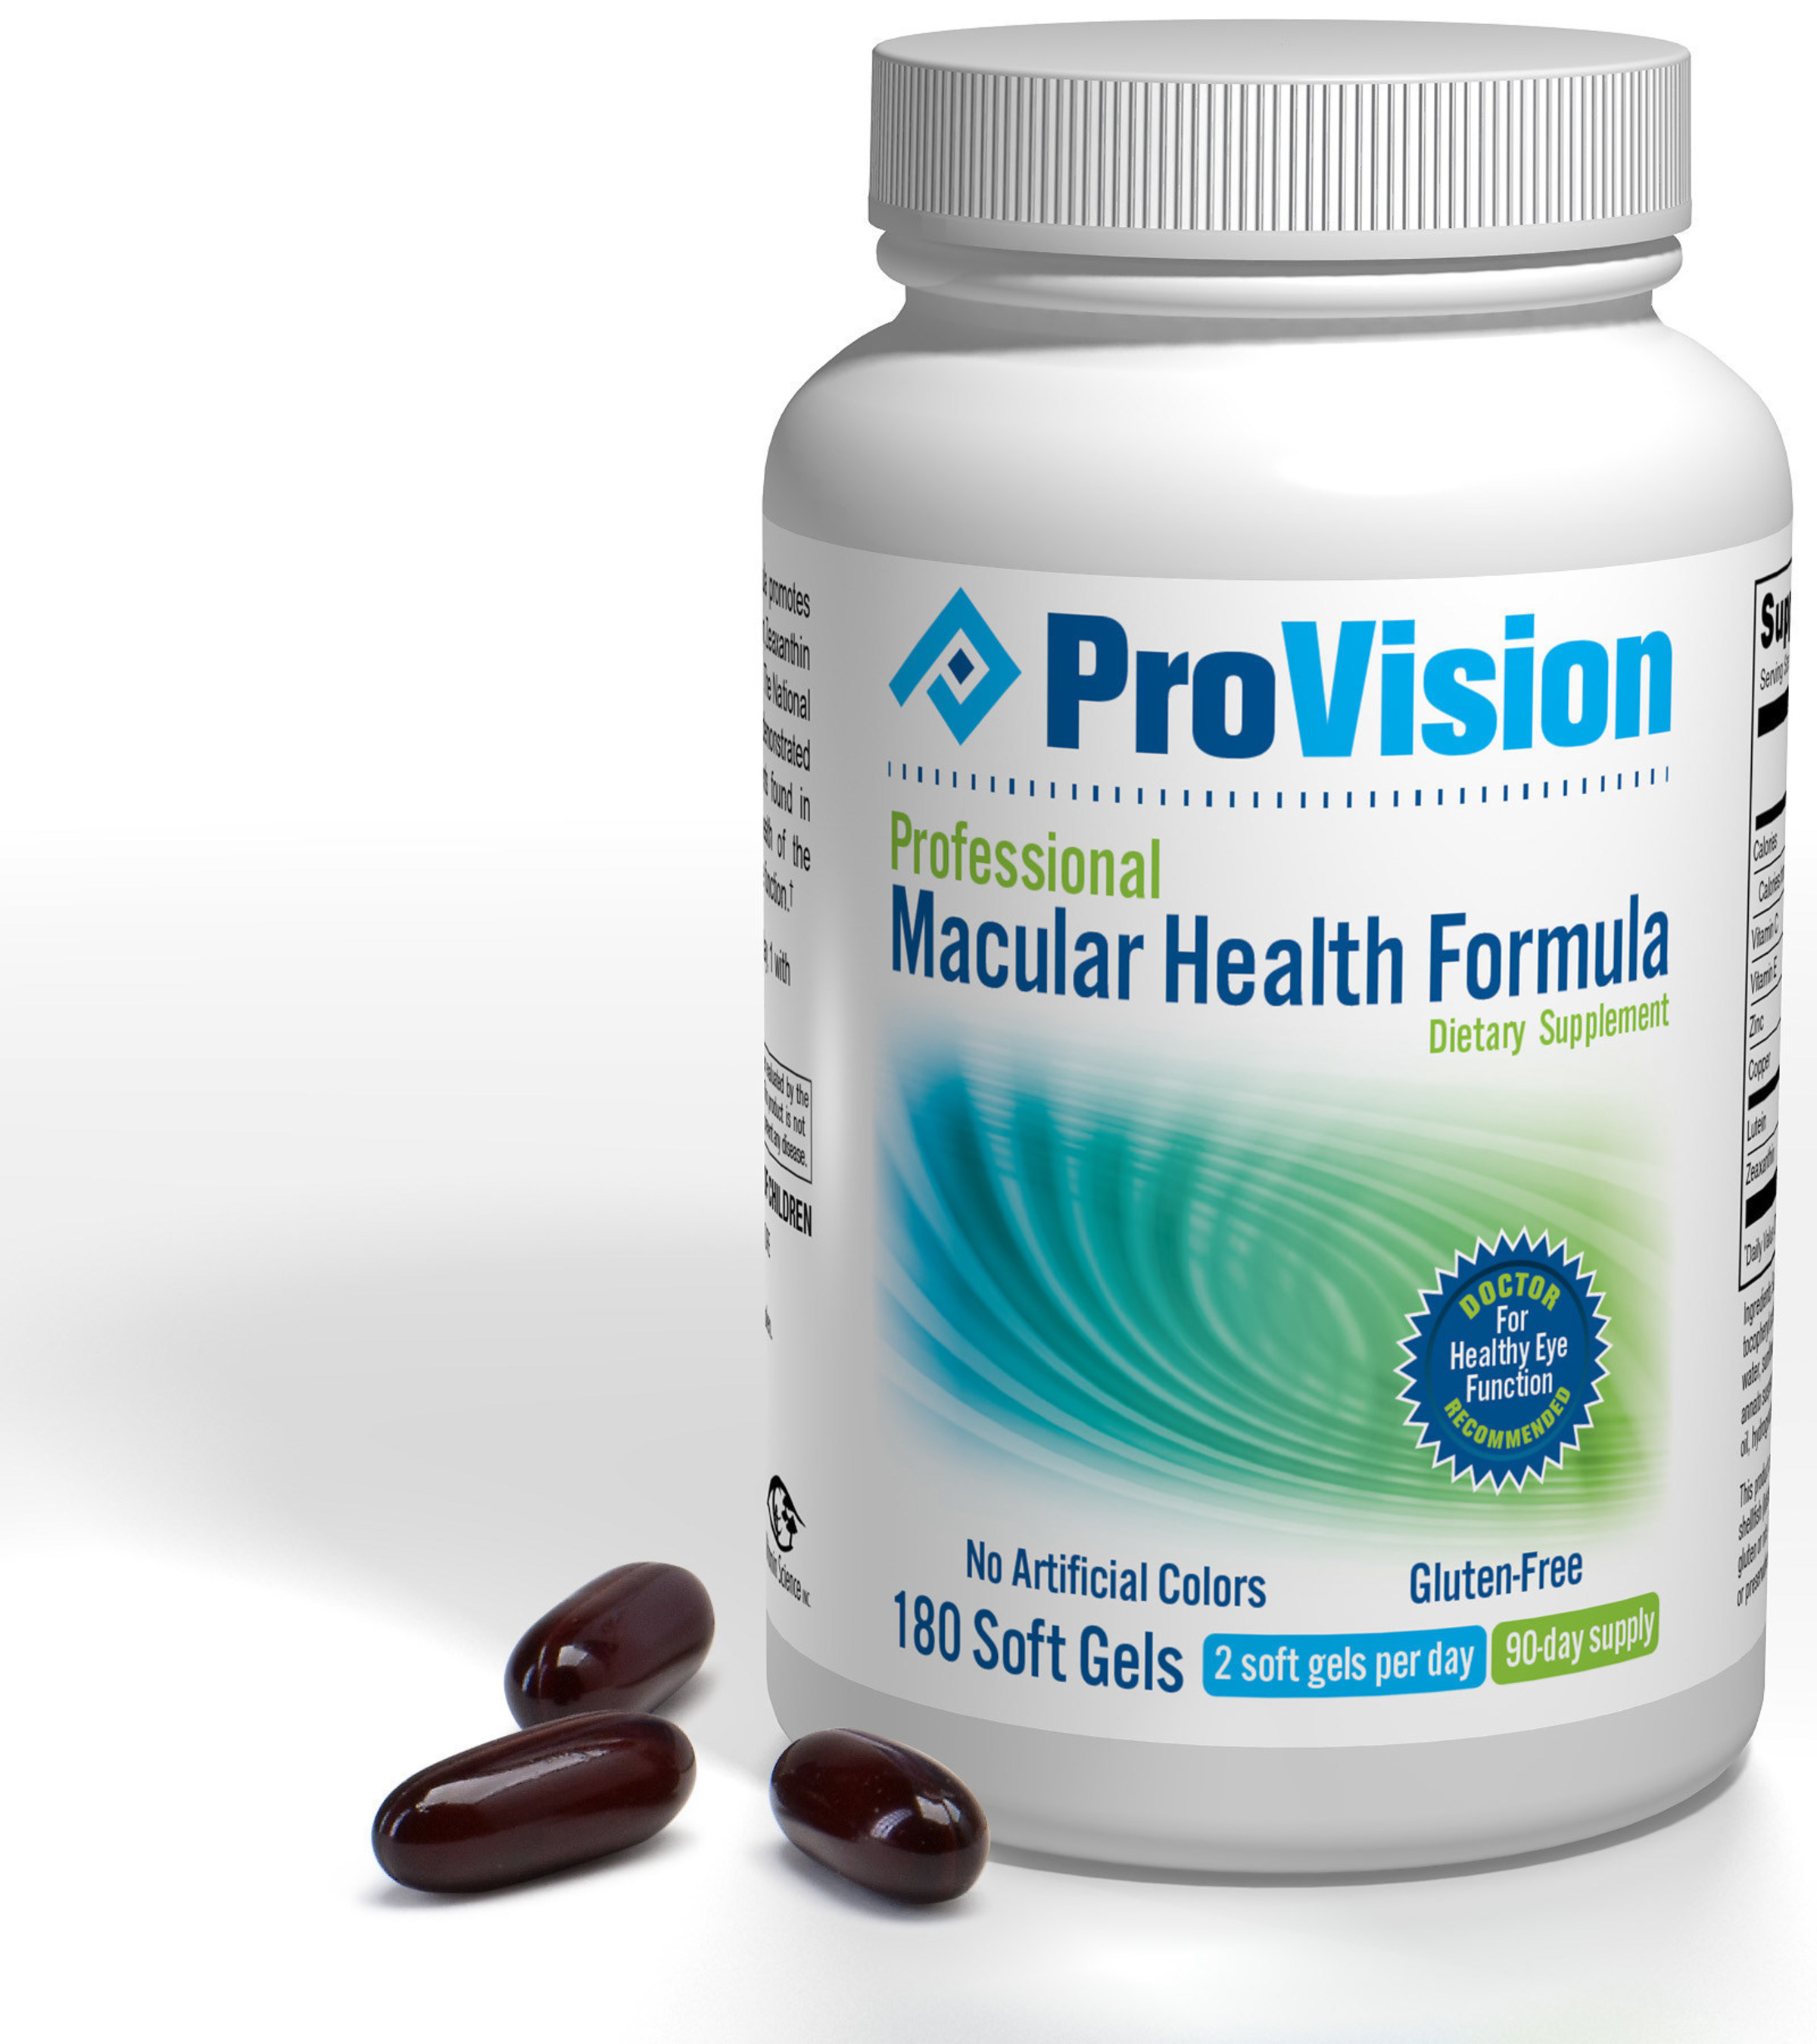 ProVision is an AREDS 2 ocular nutritional formula from Vitamin Science, Inc., a trusted leader in eye vitamins.  It is designed to support retinal health in patients with macular degeneration, and costs just $14 per month.